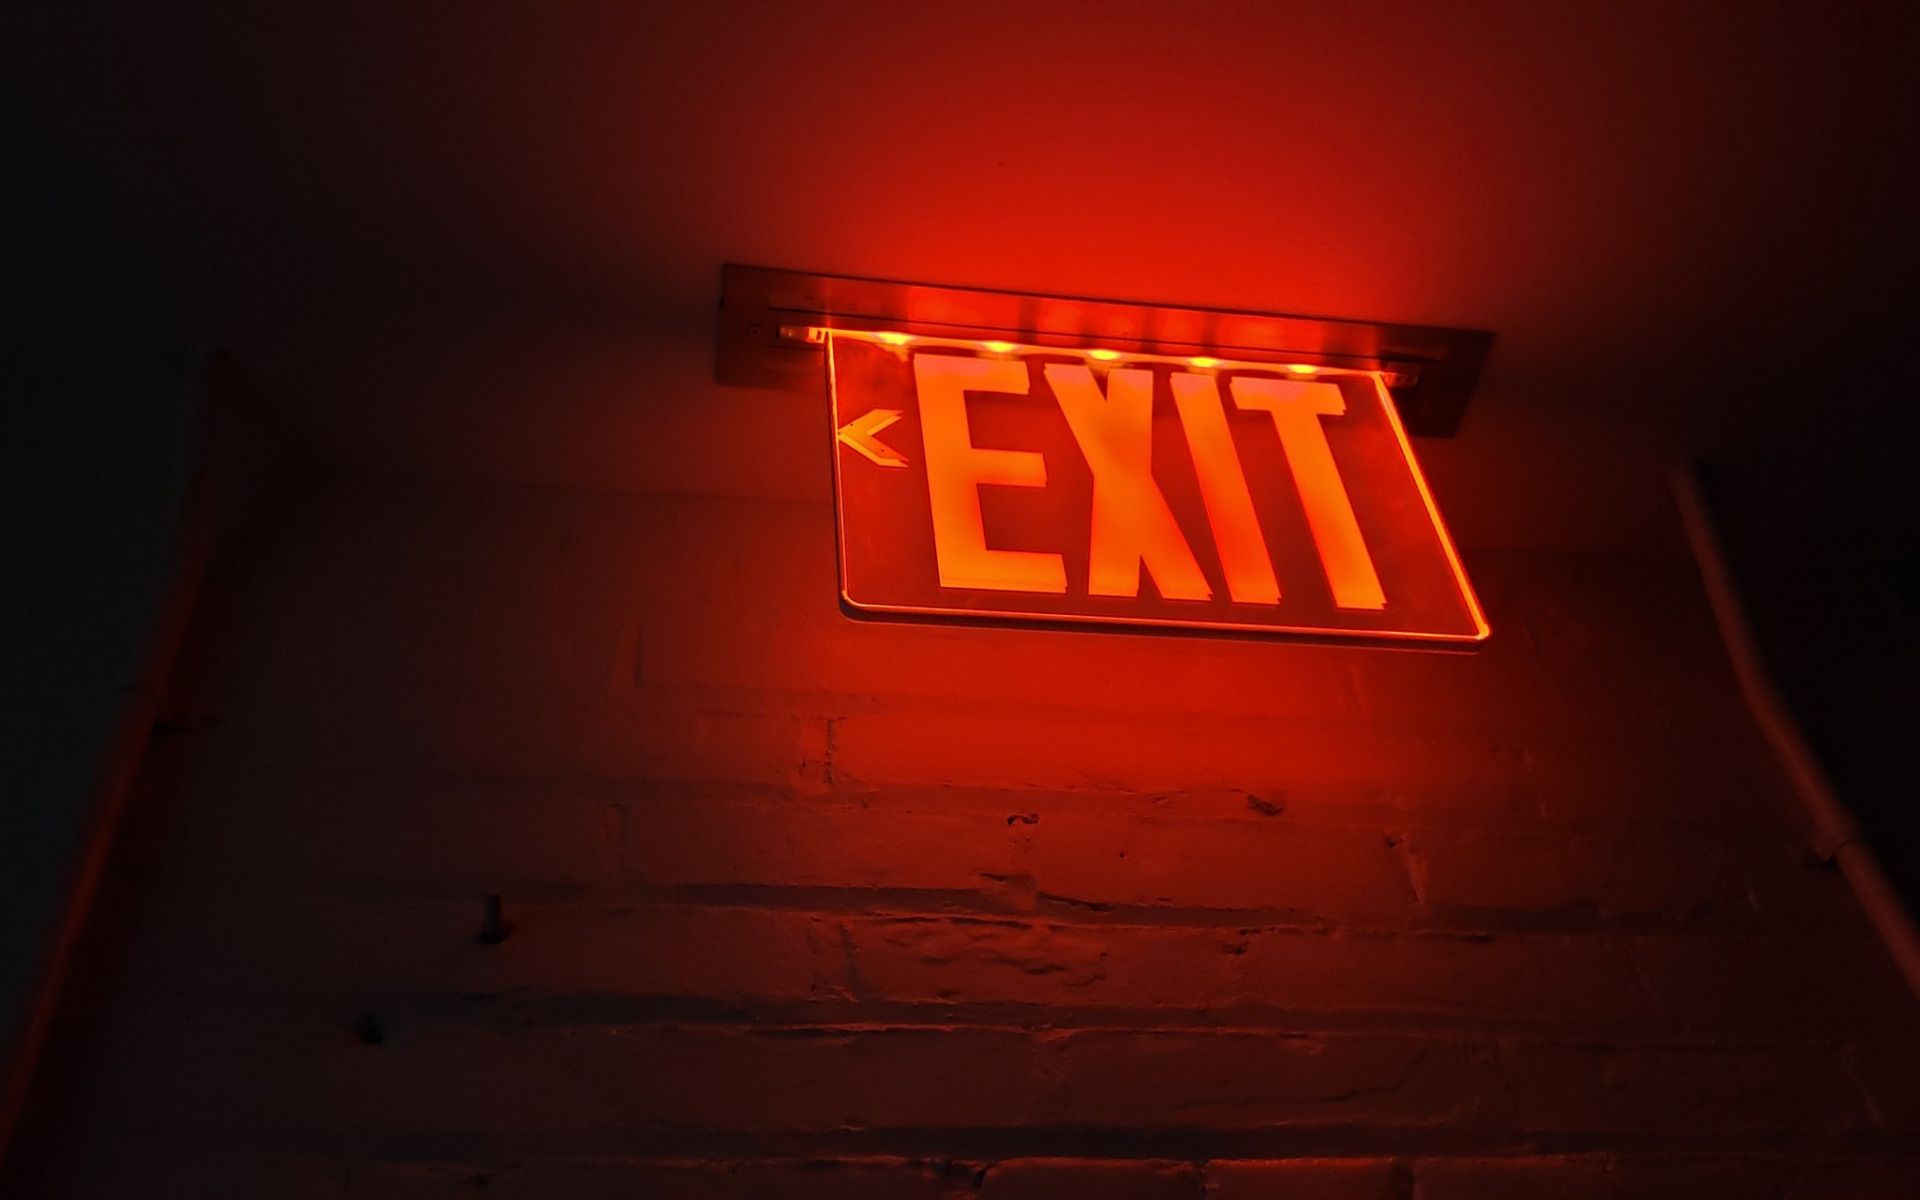 Download wallpaper Exit sign, red neon sign, night, red lights, exit for desktop with resolution 1920x1200. High Quality HD picture wallpaper